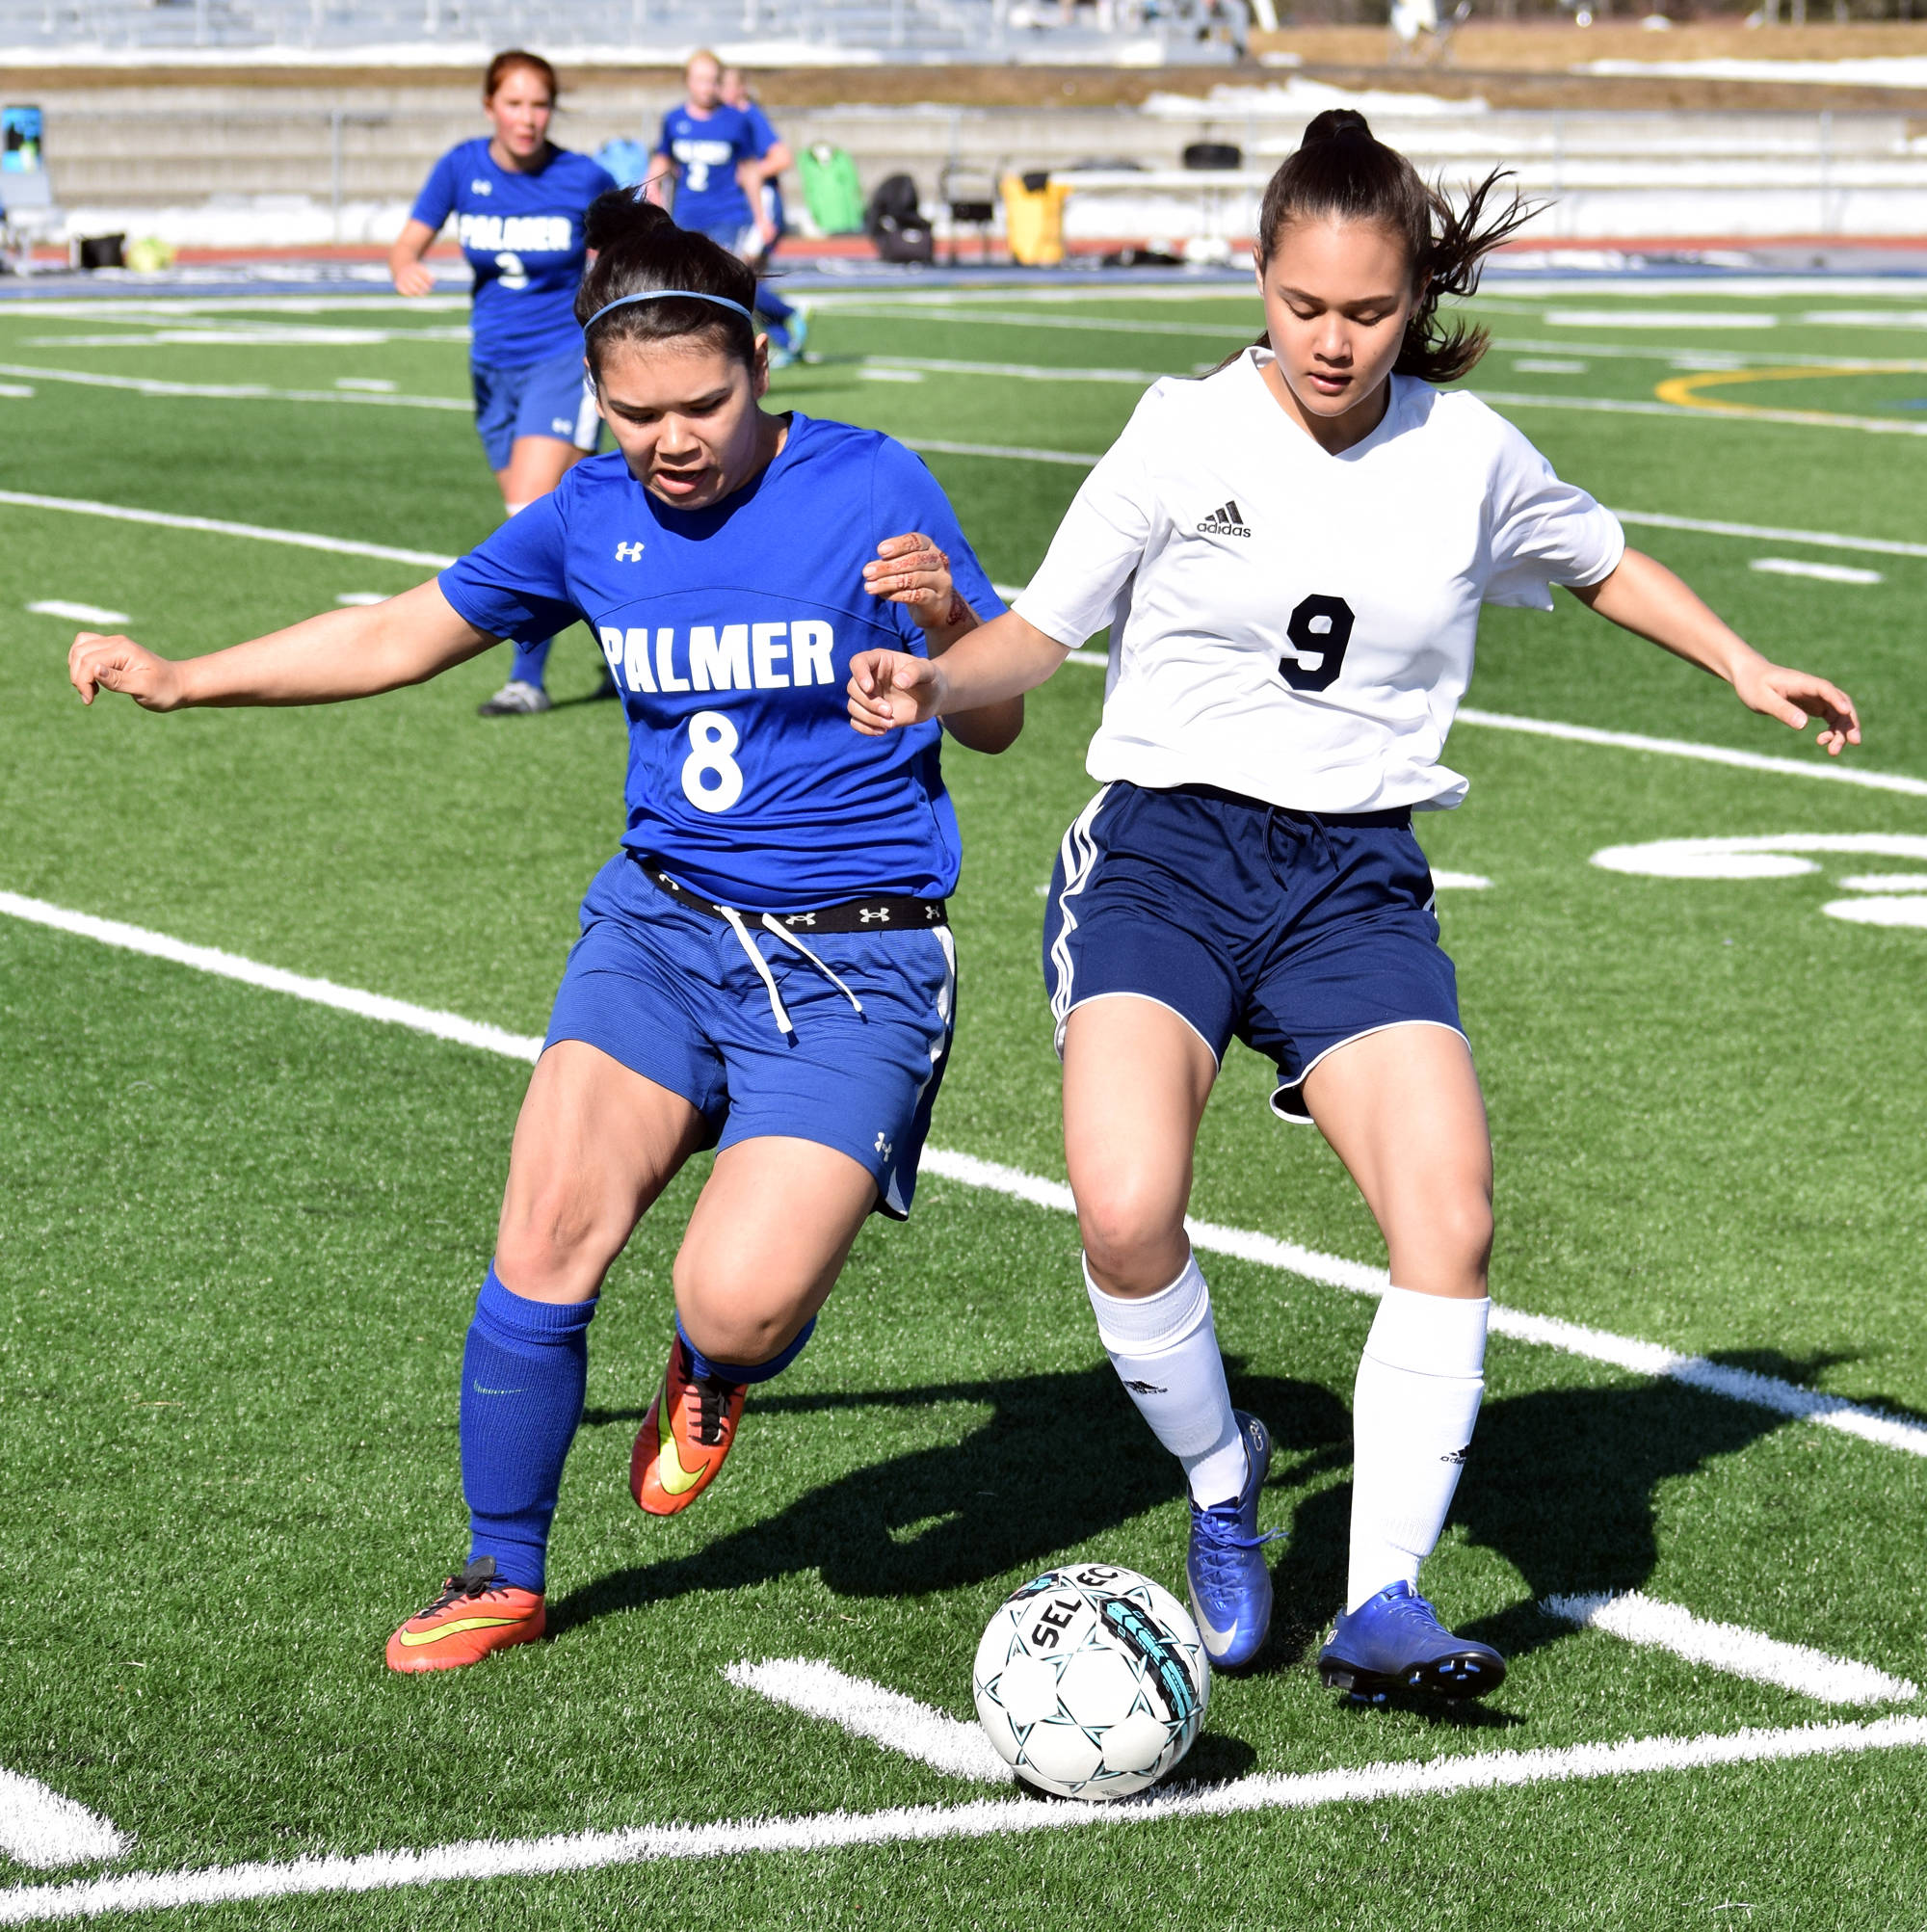 Soldotna freshman Faith Glassmaker (9) fights for possession against Palmer’s Emma Obeso Friday afternoon at Justin Maile Field in Soldotna. (Photo by Joey Klecka/Peninsula Clarion)